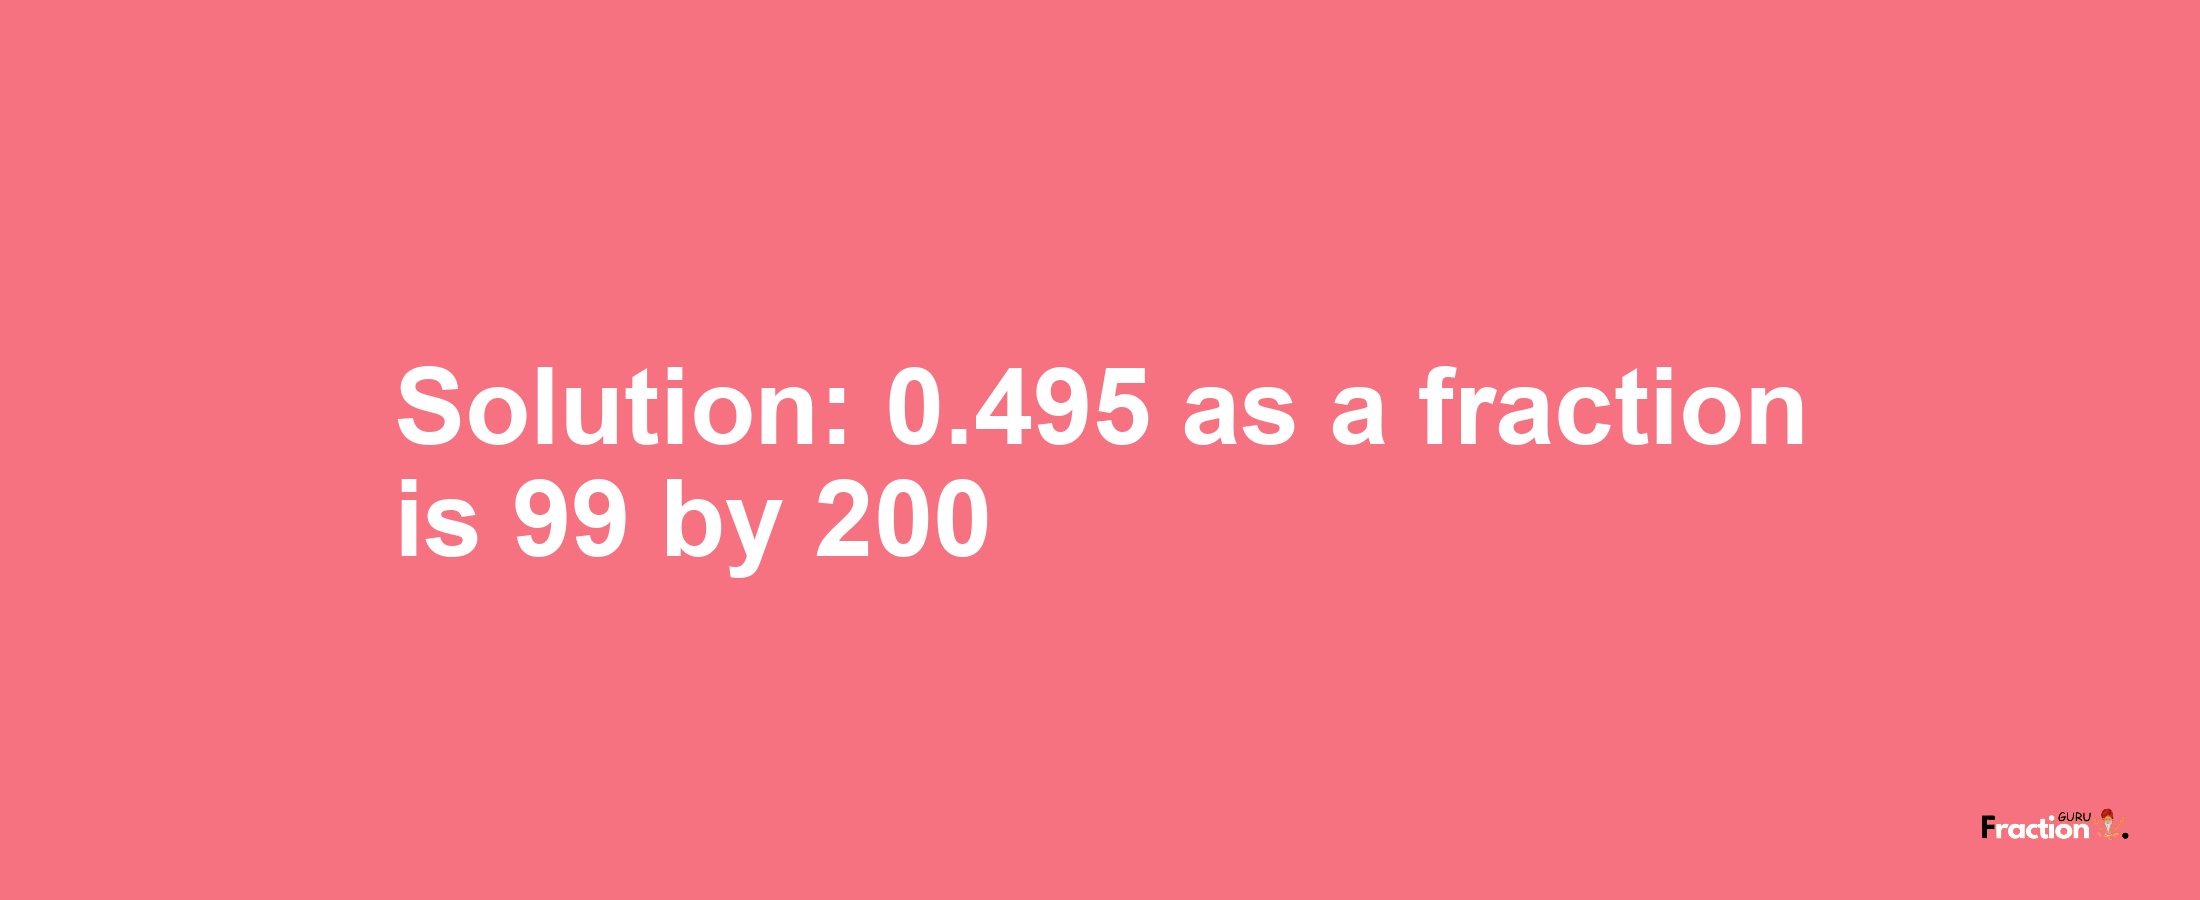 Solution:0.495 as a fraction is 99/200